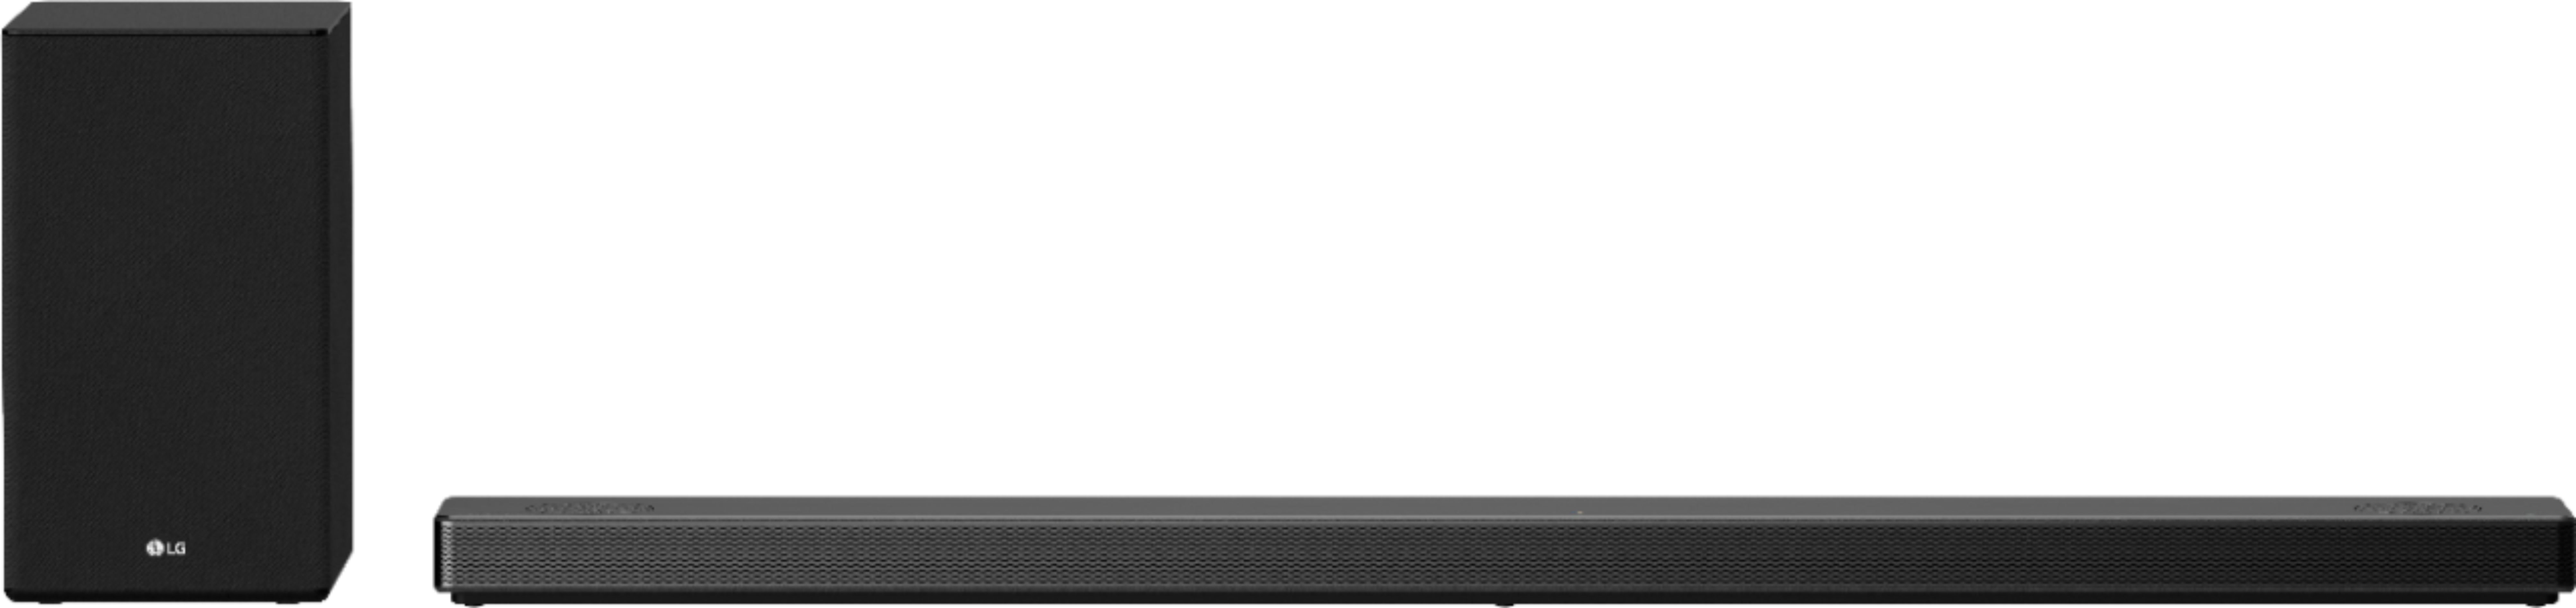 hovedpine Total Gravere Best Buy: LG 5.1.2-Channel 570W Soundbar System with Wireless Subwoofer and  Dolby Atmos with Google Assistant Black LG SN10YG